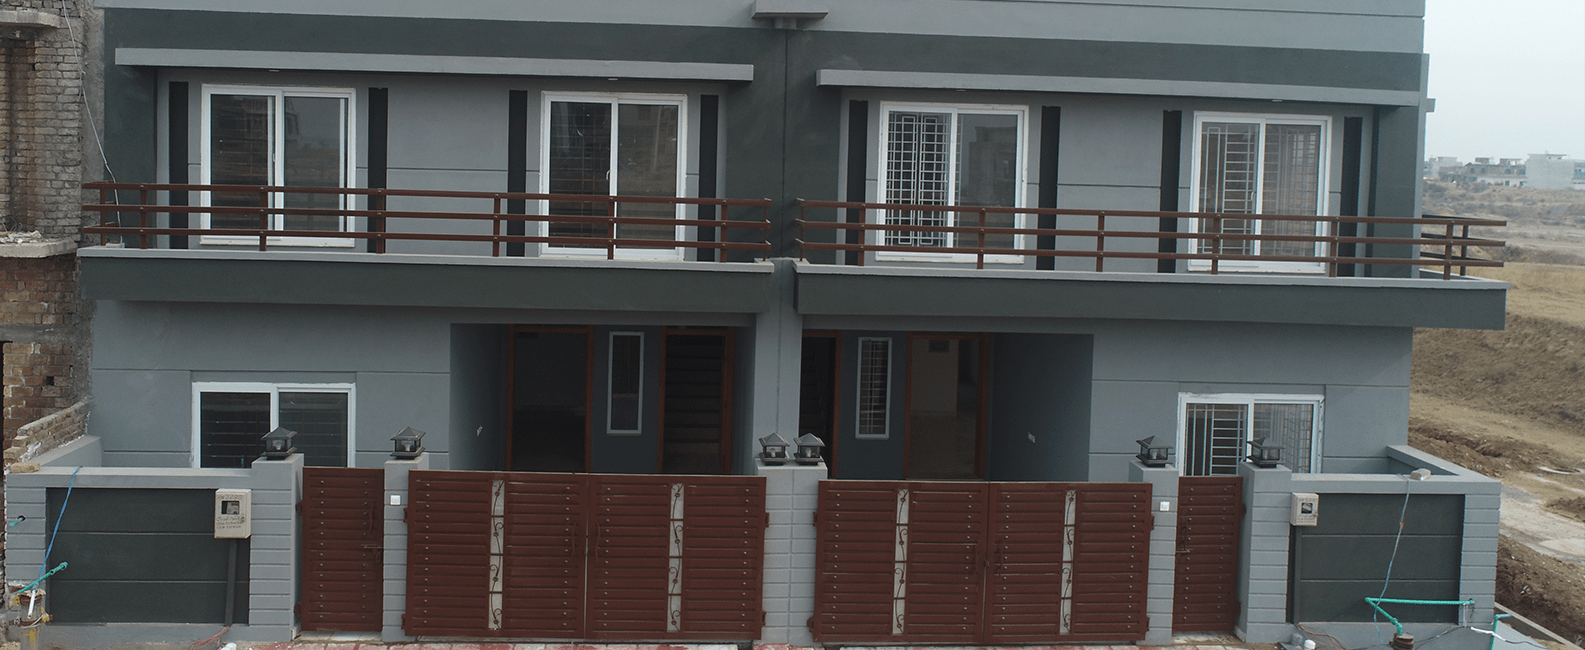 Exterior-Cloud Villas Phase-II, Aproject by The Cloud Services.